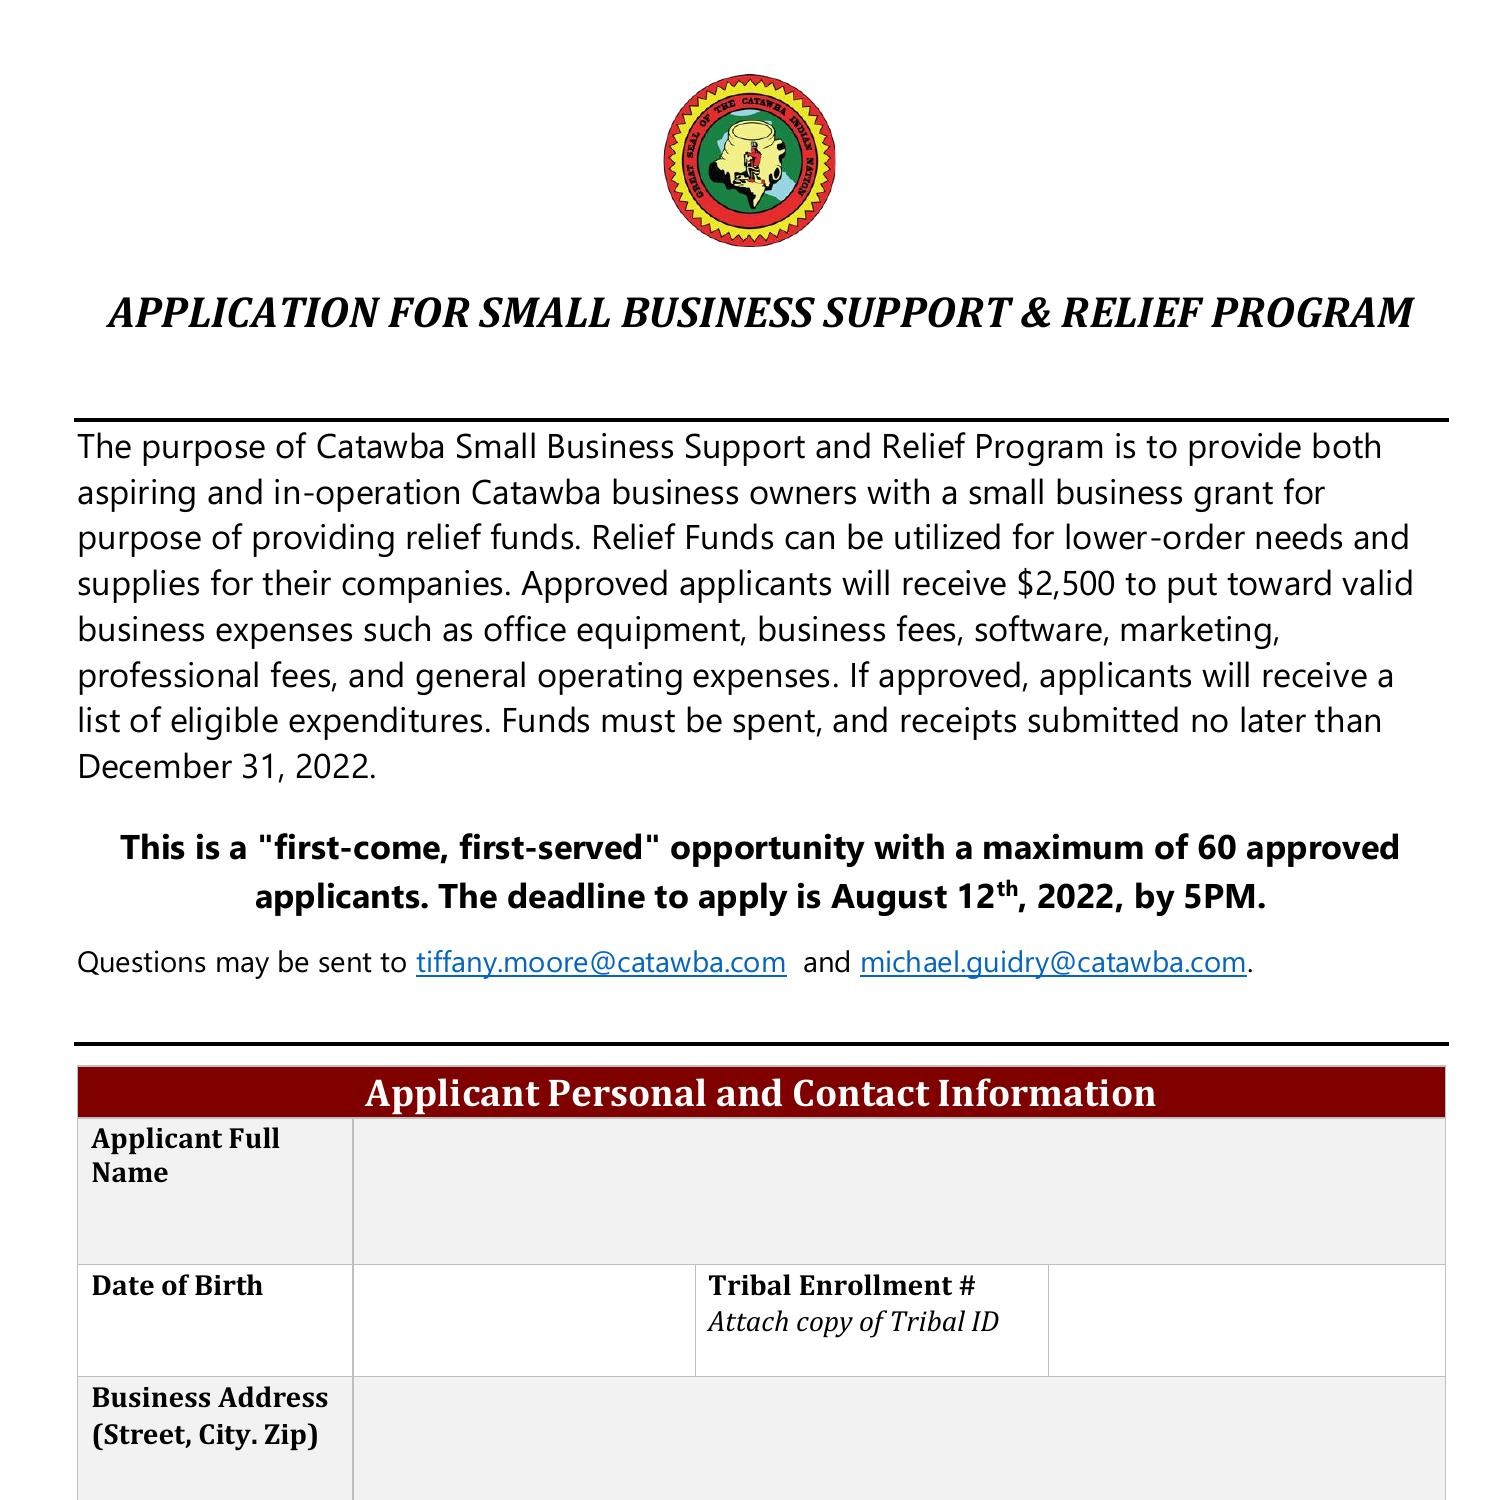 Application Small Business Support & Relief Program_fillable.pdf DocDroid